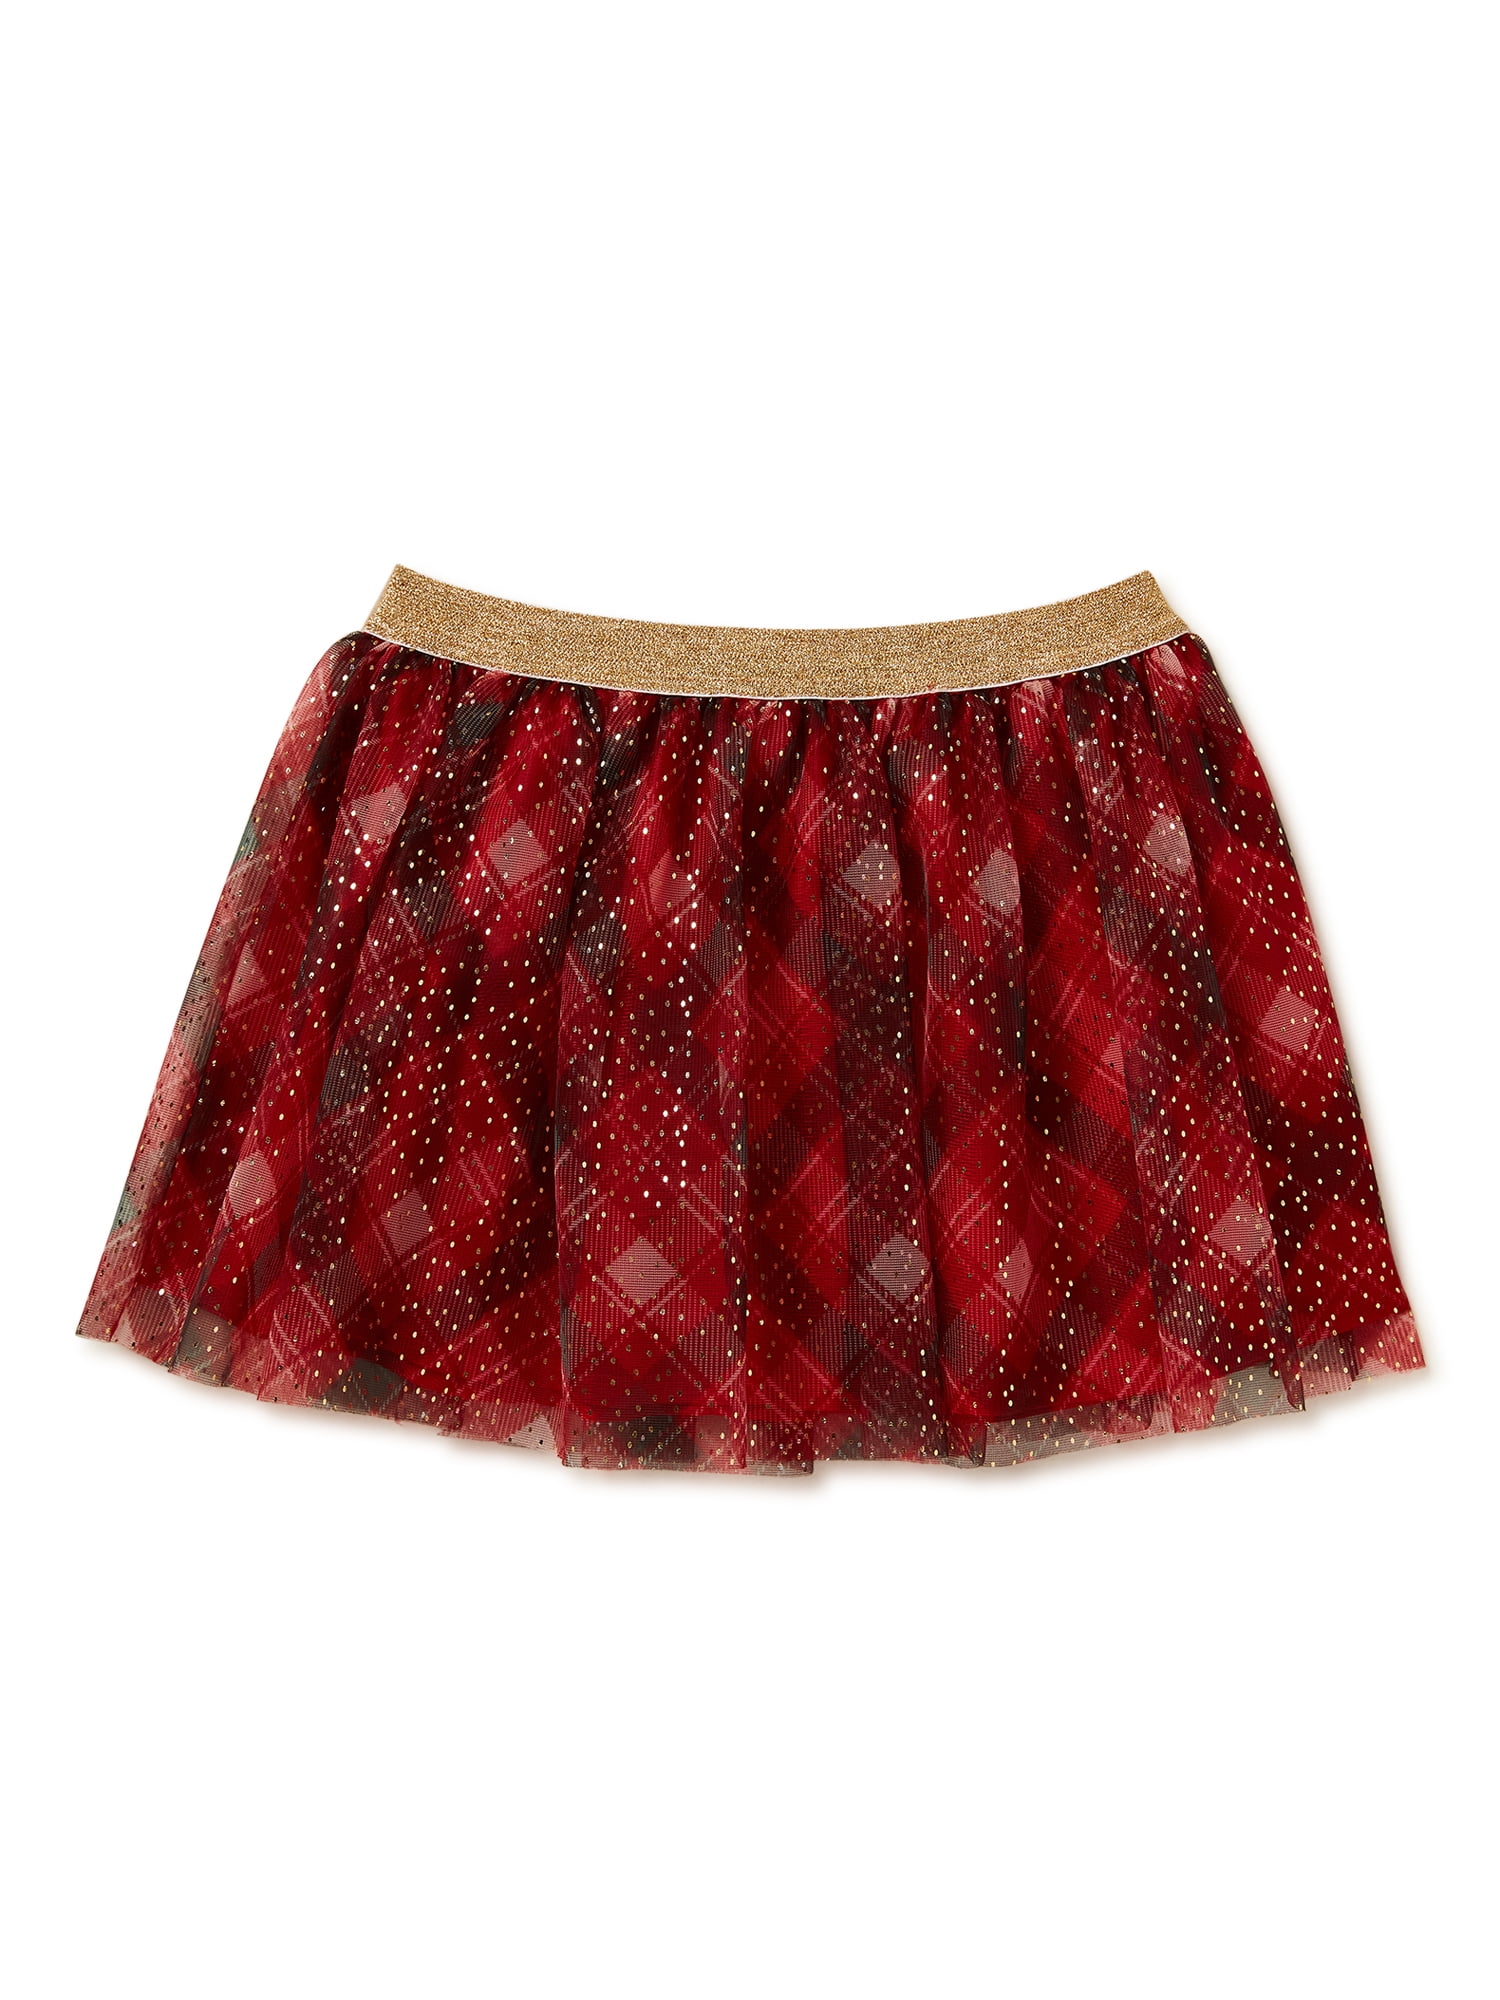 Holiday Time Baby and Toddler Girls Christmas Tutu Skirt, Sizes 12 Months-5T